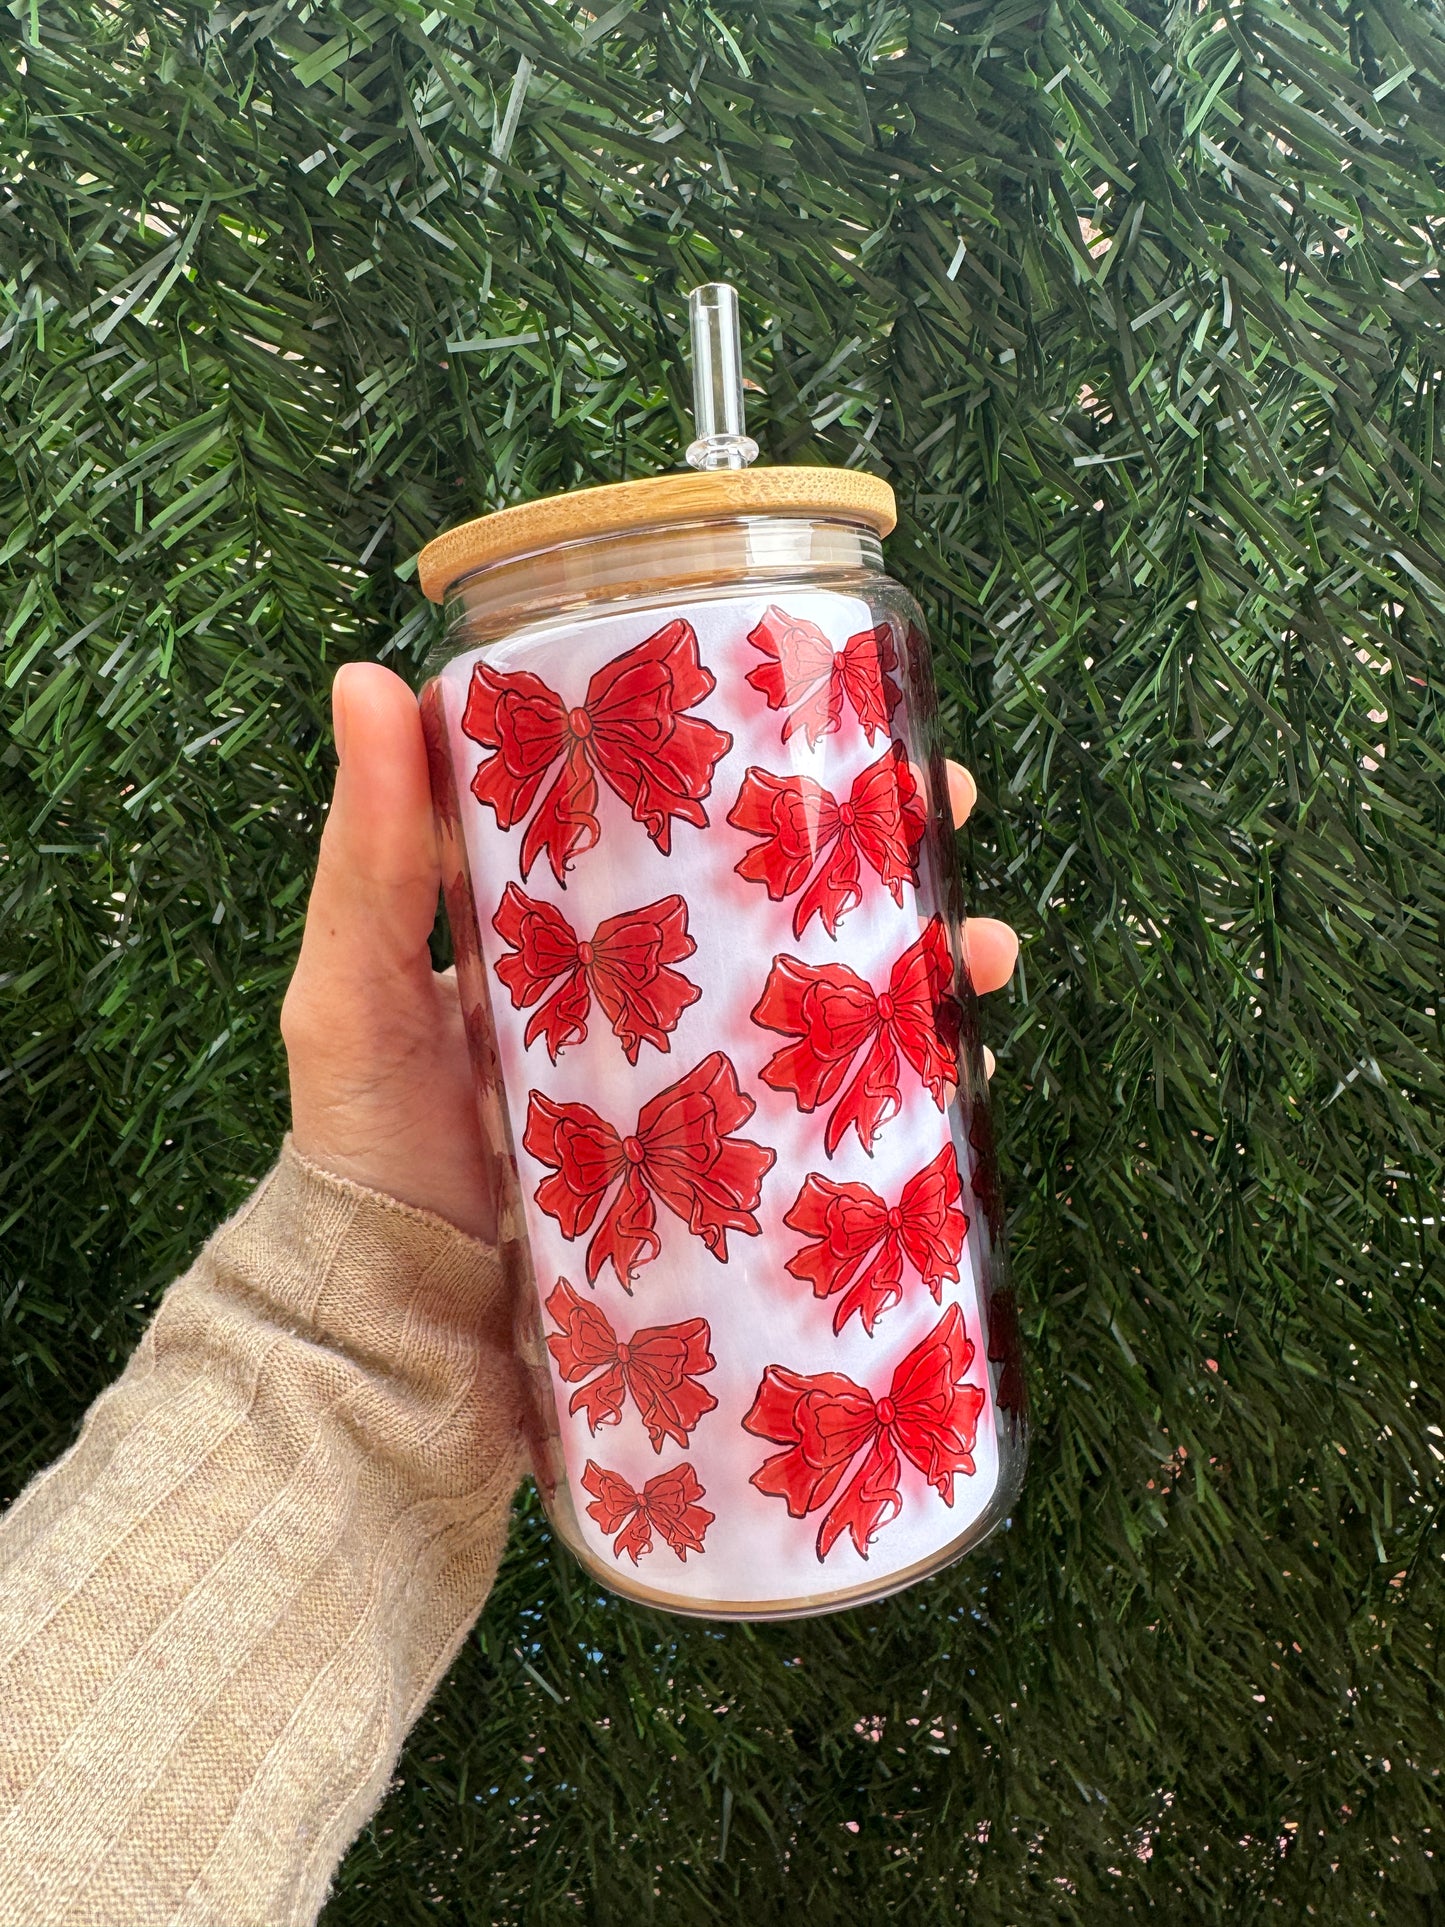 GLASS TUMBLER WITH RED BOWS